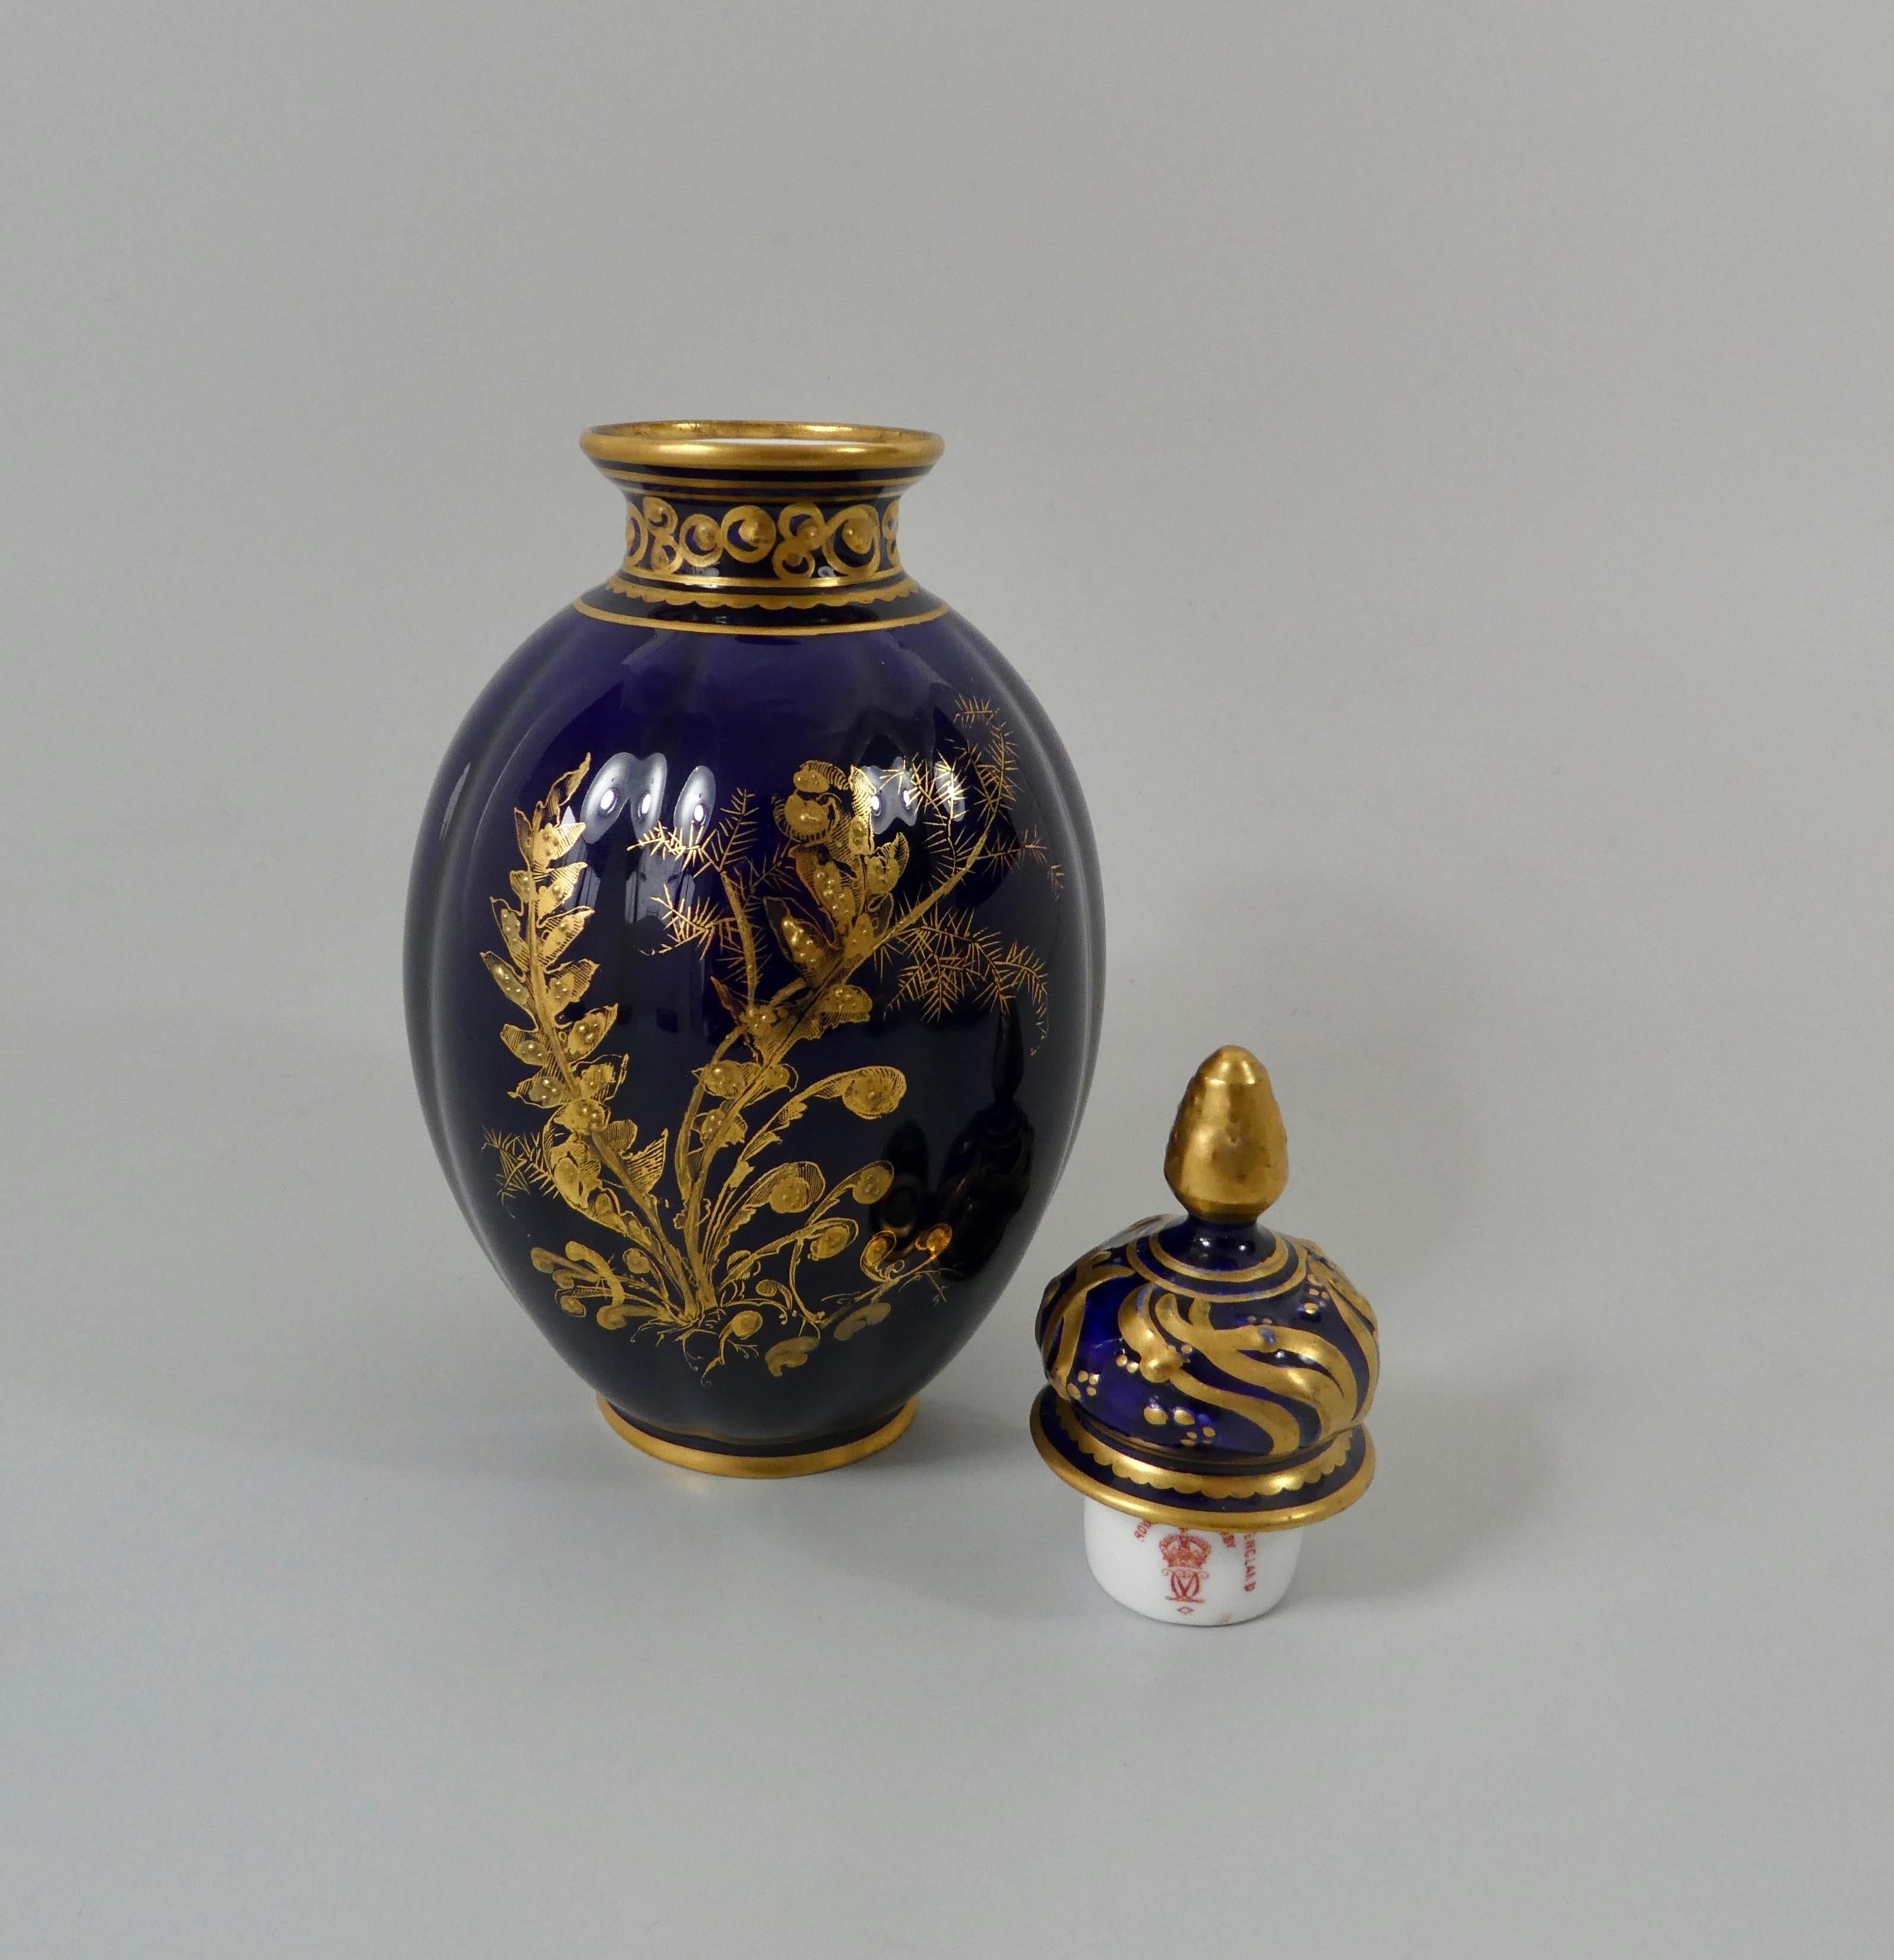 20th Century Royal Crown Derby Porcelain Vase and Cover, Dated 1909